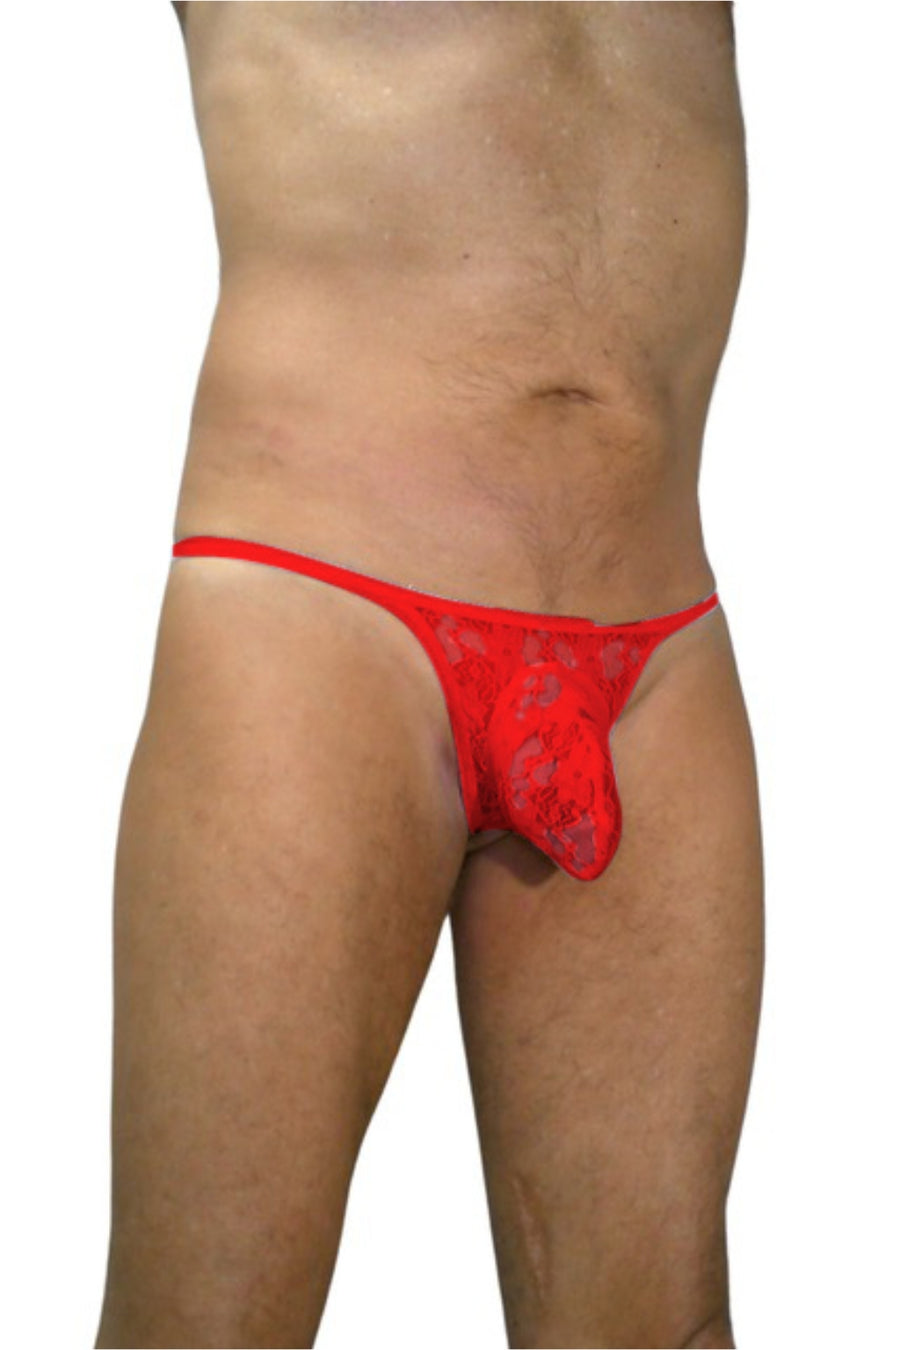 BfM Mens Lace Bulge Pouch G-String Underwear